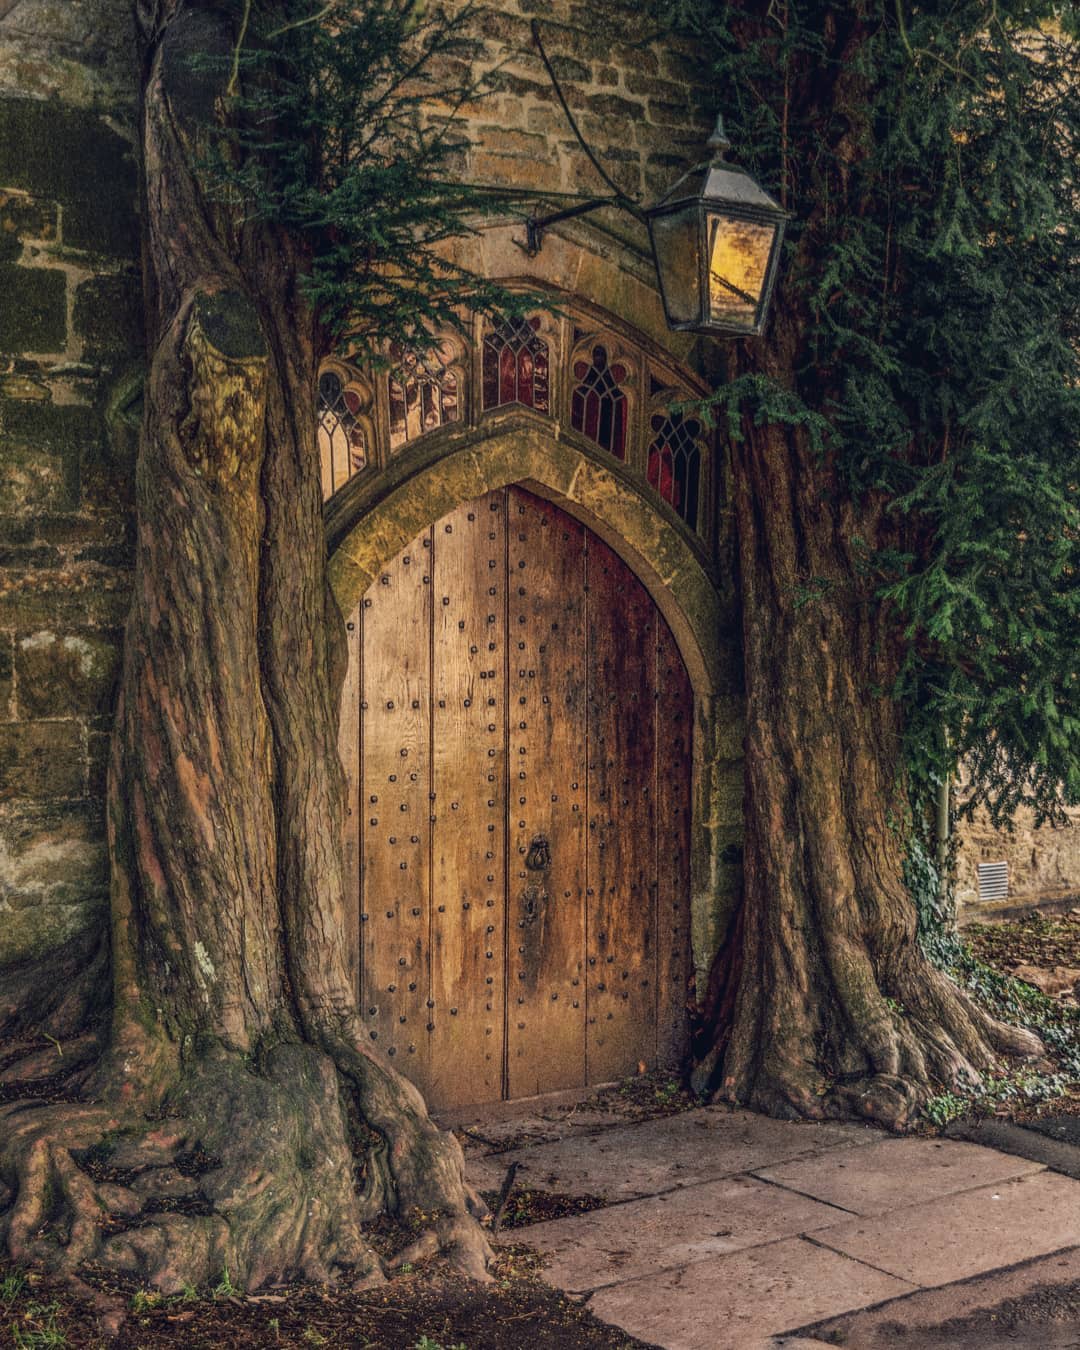 Entrance of the 11th century St Edward's Church flanked by yew trees, Stow-on-the-Wold, Gloucestershire, South West England.